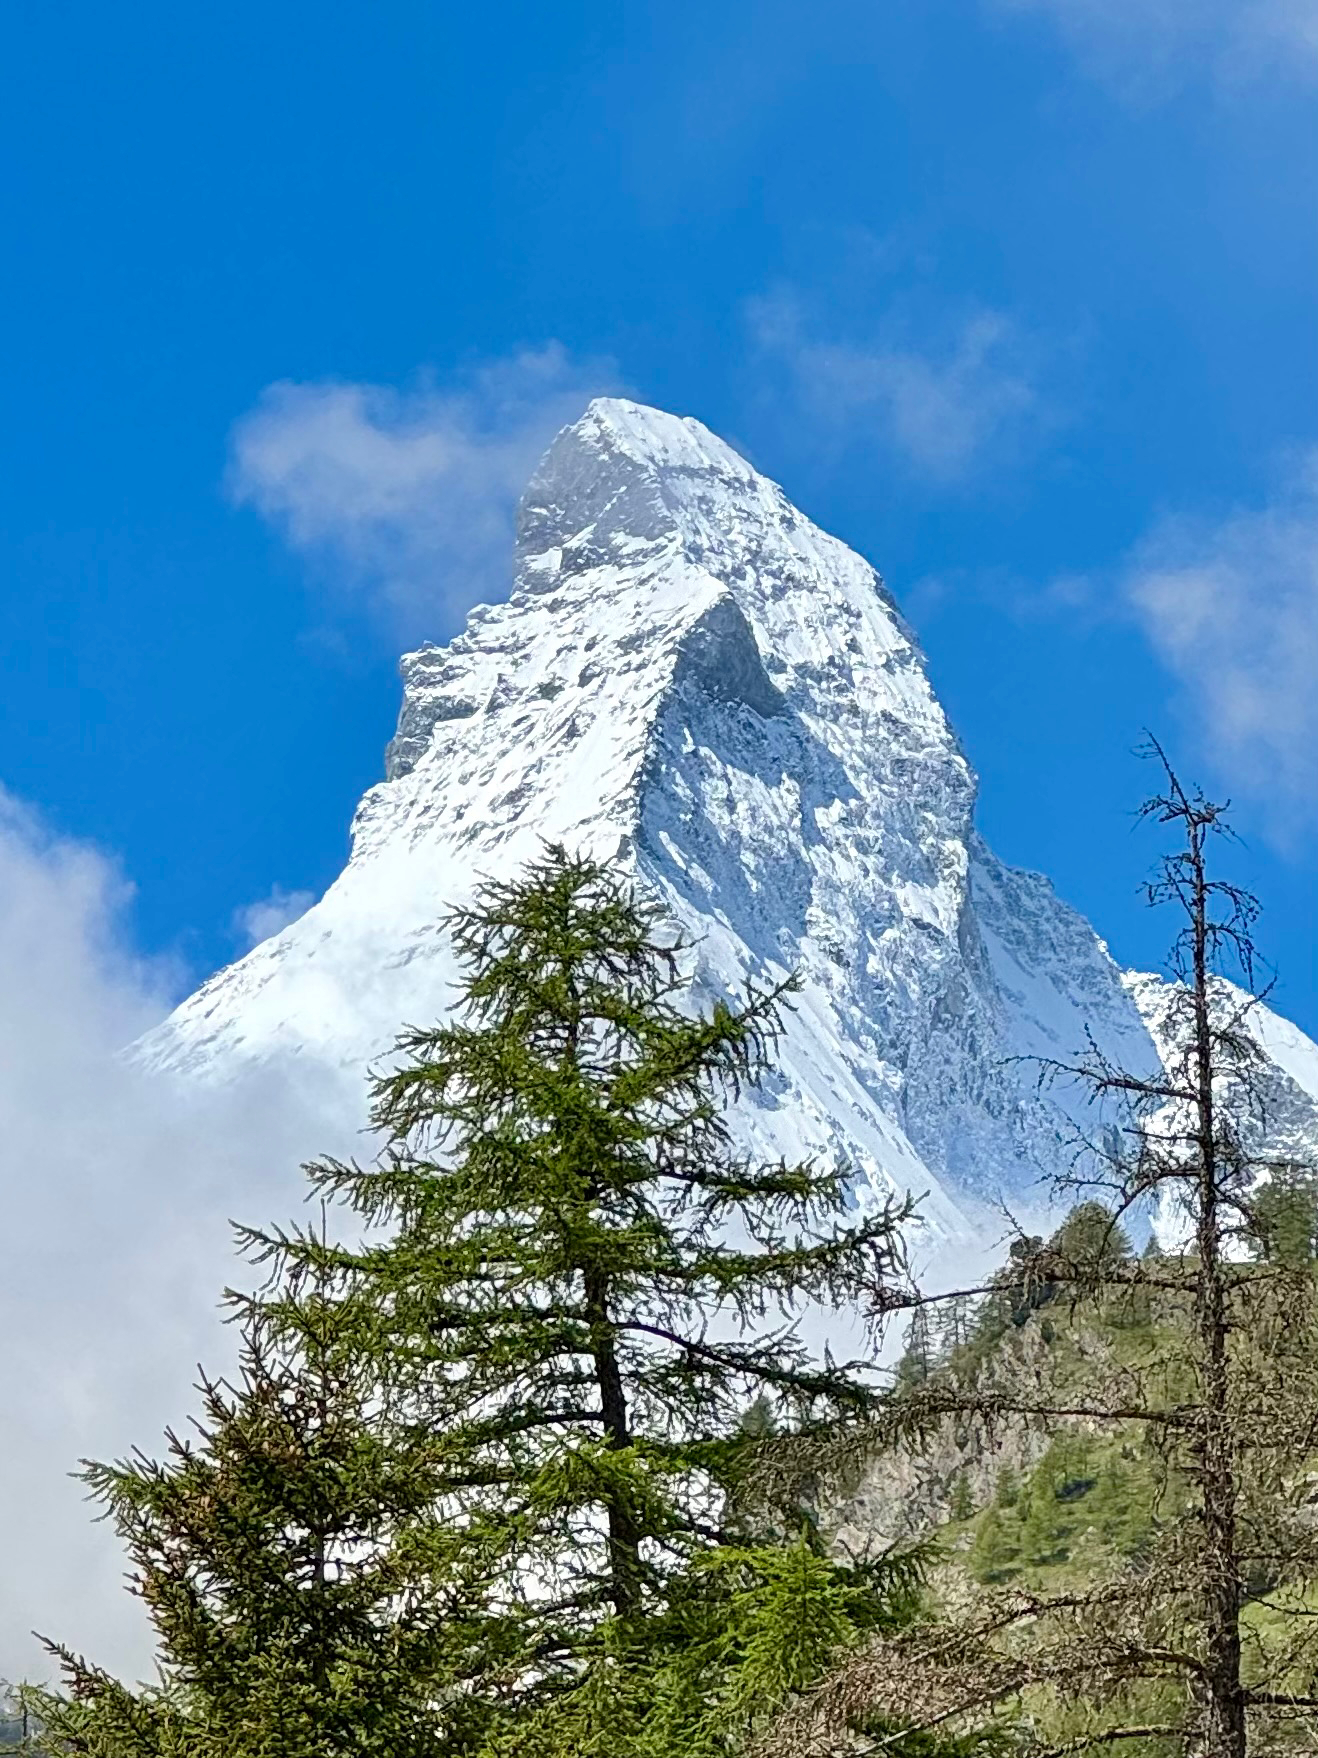 Snow-covered mountain peak against a blue sky, with evergreen trees in the foreground.